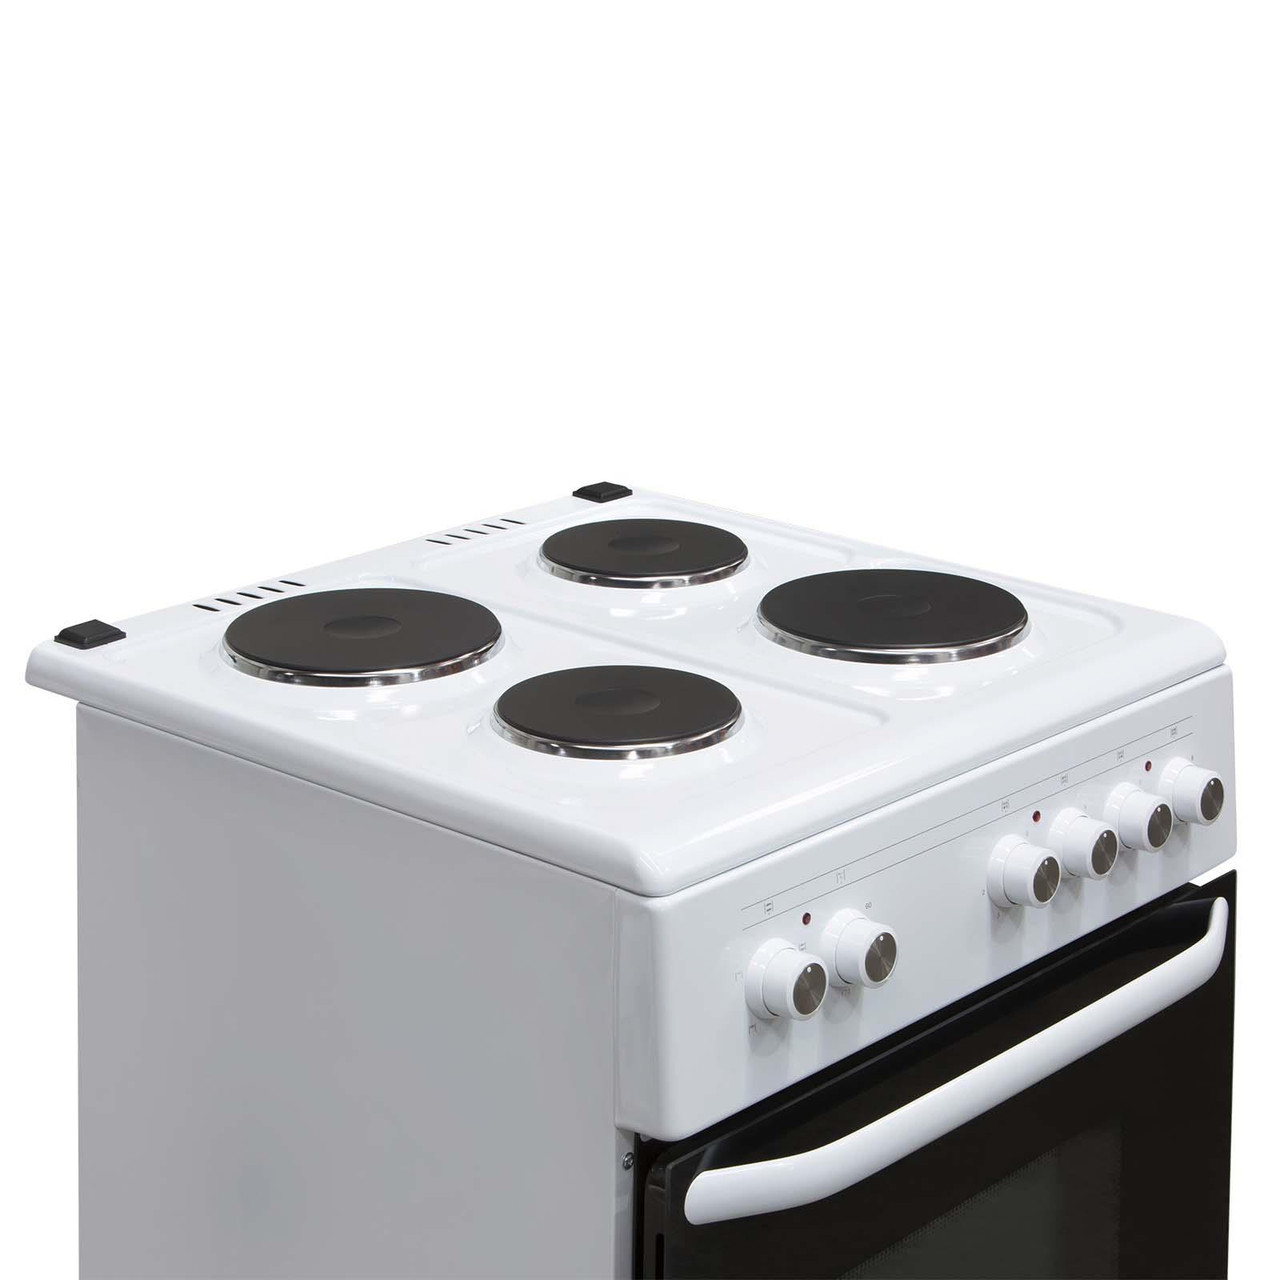 Electric 4-Hot Plate Cooker With Oven - Extrabigsale